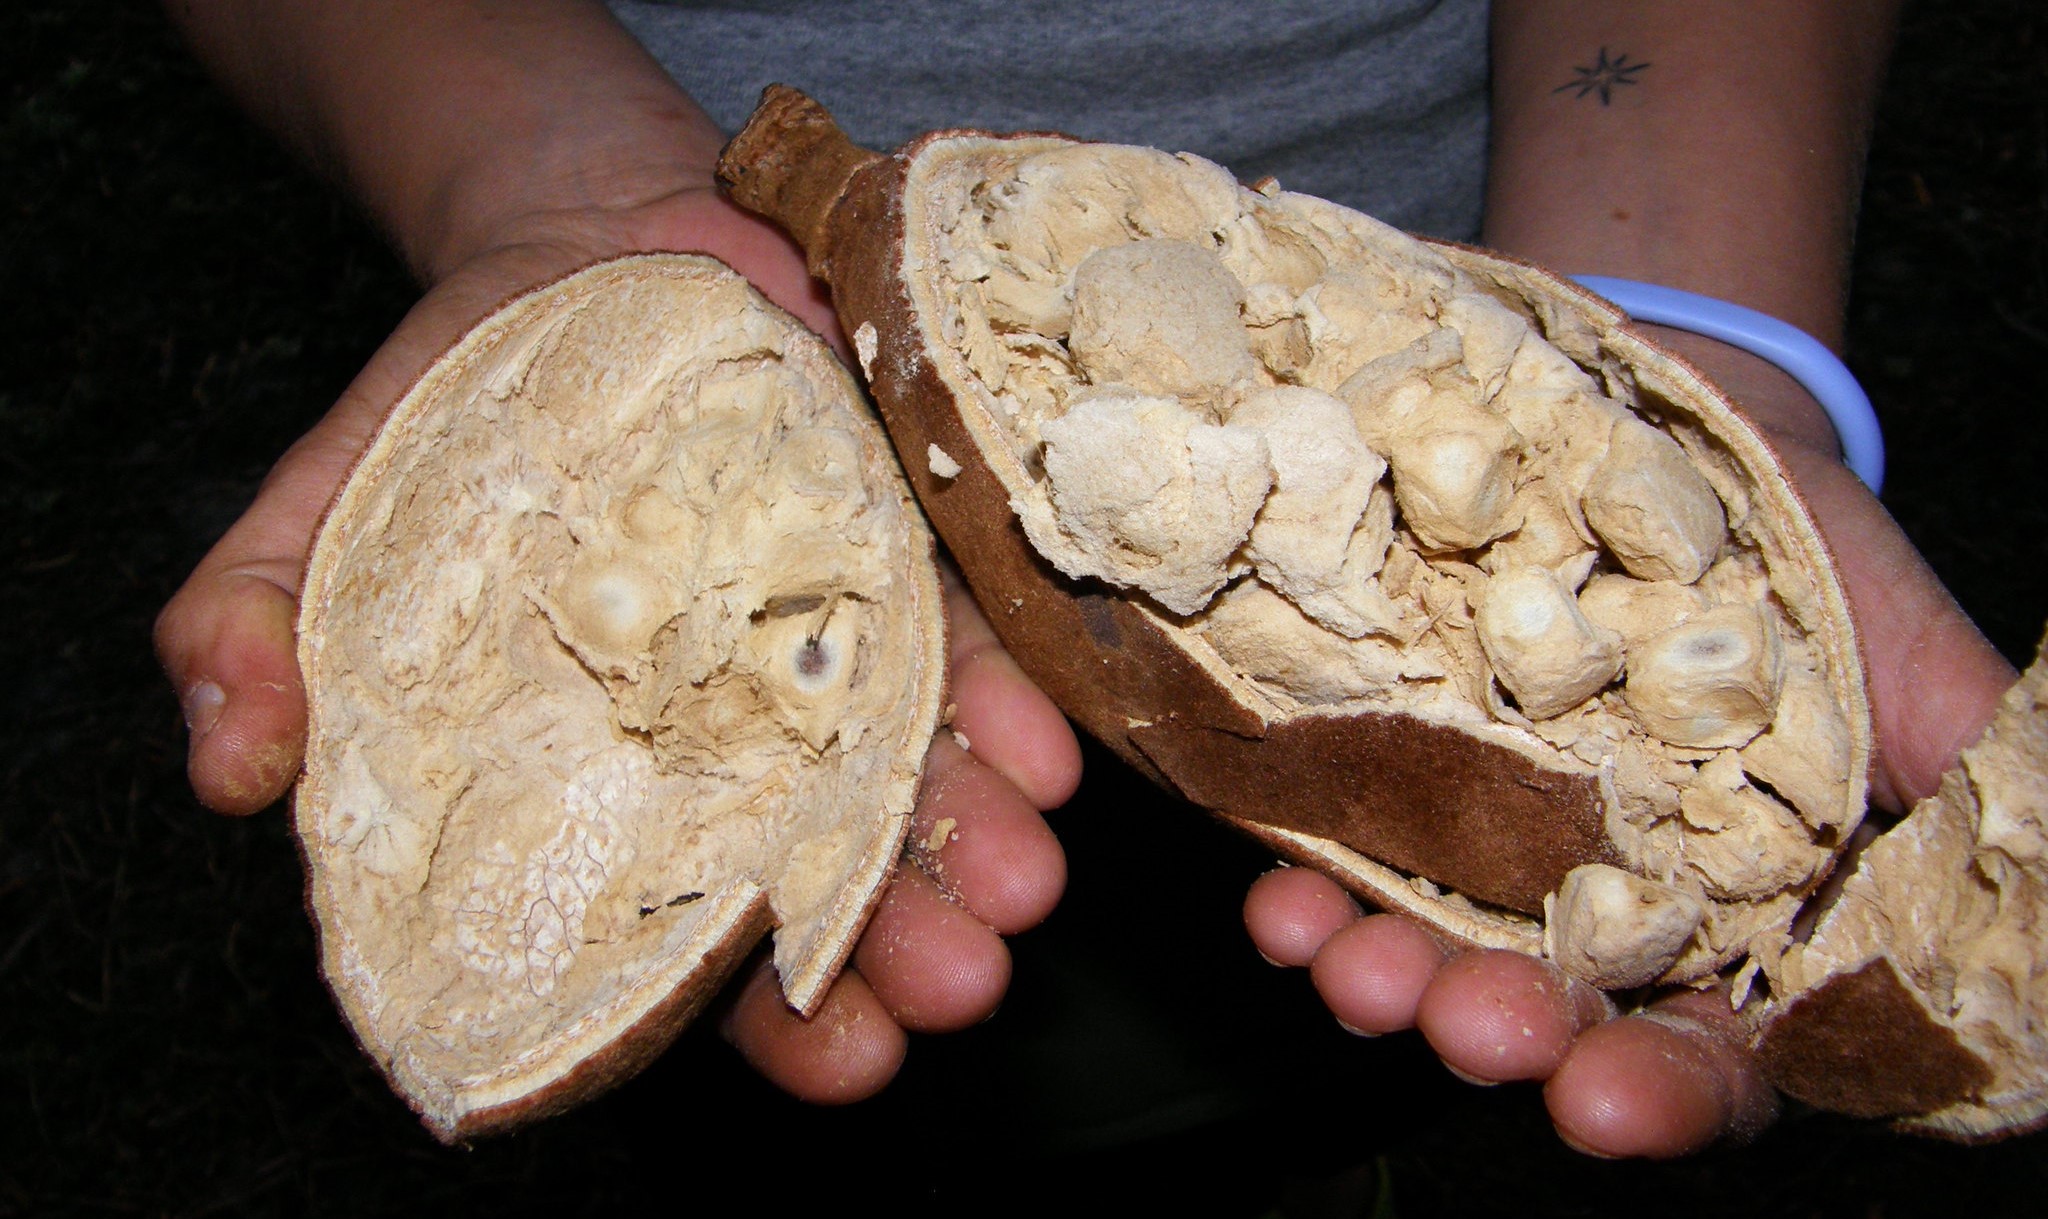 Local baobab fruit a delicacy in local Vic Falls cuisine